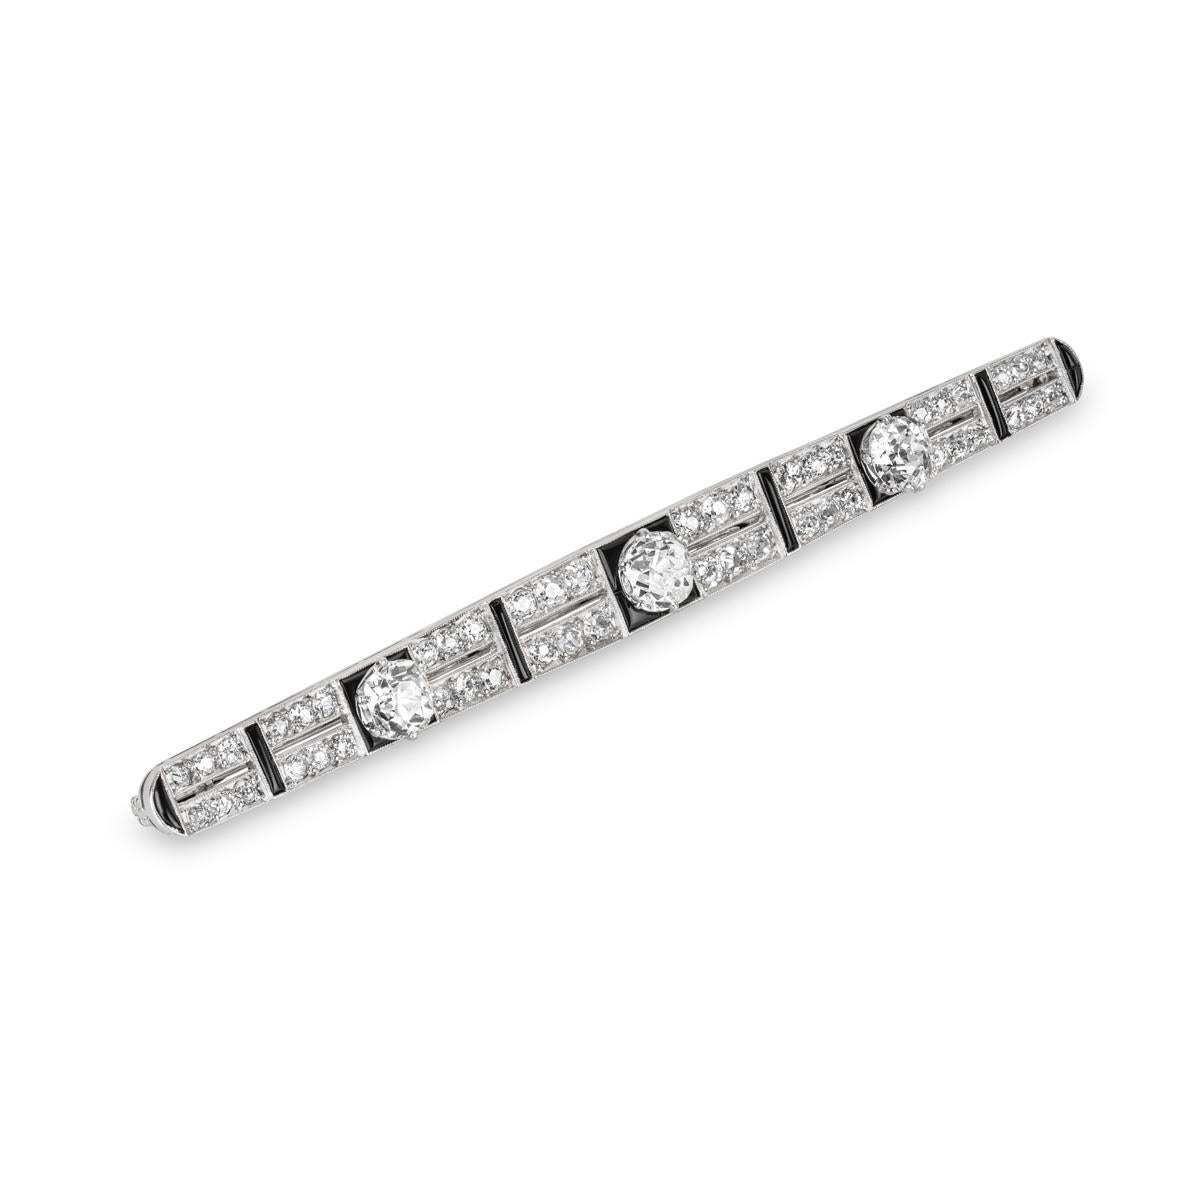 A vintage platinum diamond and onyx brooch circa 1920. The brooch is made up of two rows set with 48 old cut diamonds, joined by intermittent onyx bars. The diamonds have an approximate total weight of 2.95ct, H-J colour and SI-I clarity. Adorning